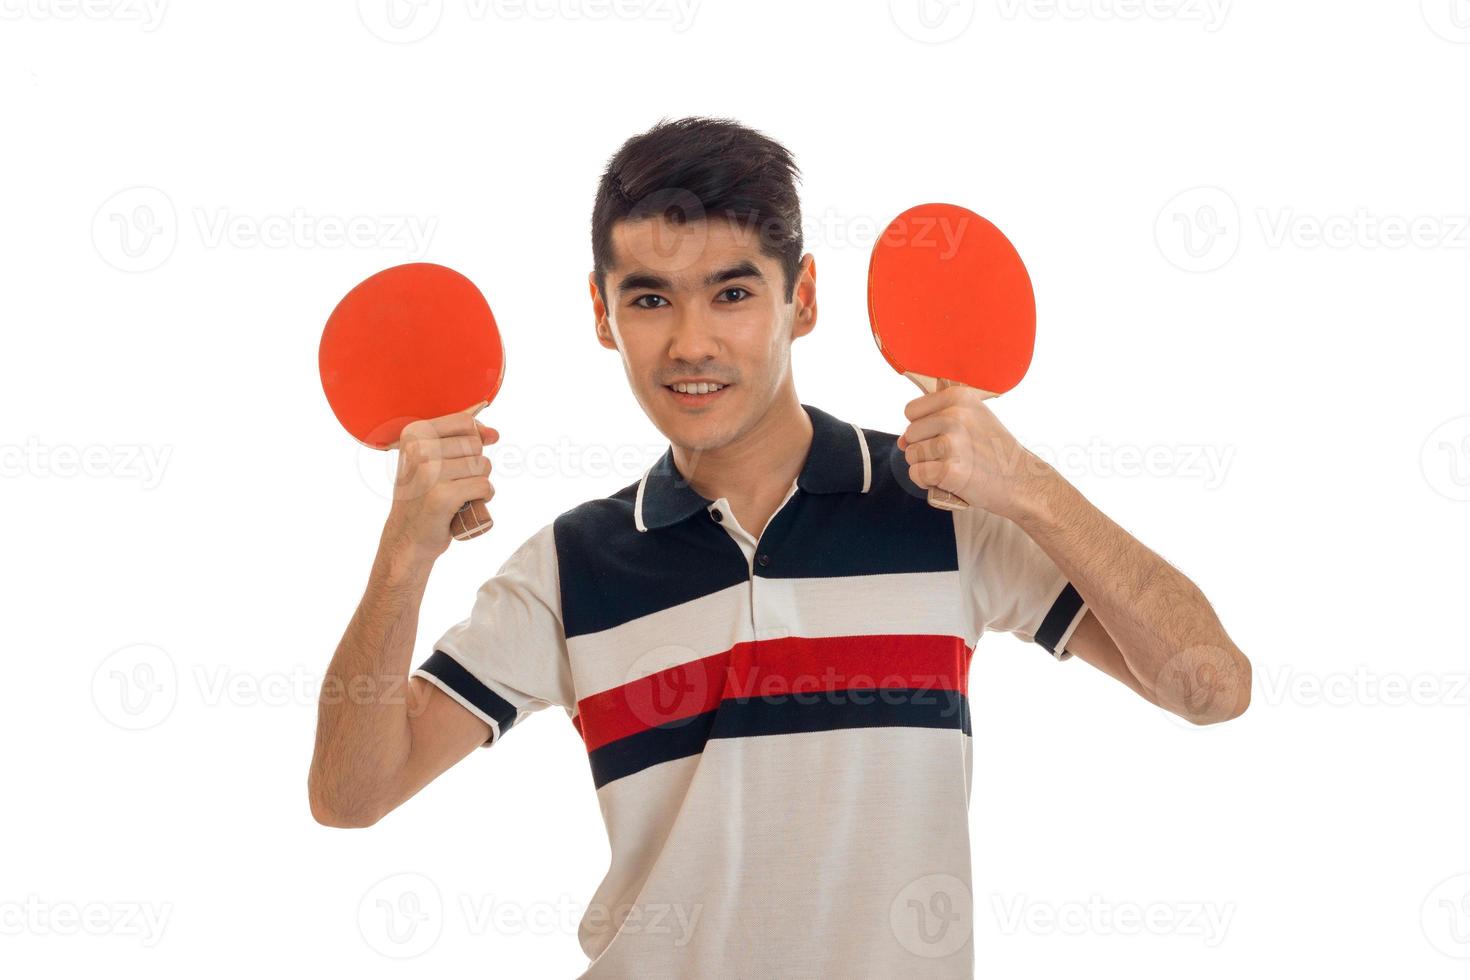 young handsome sportsman practicing ping-pong isolated on white background photo